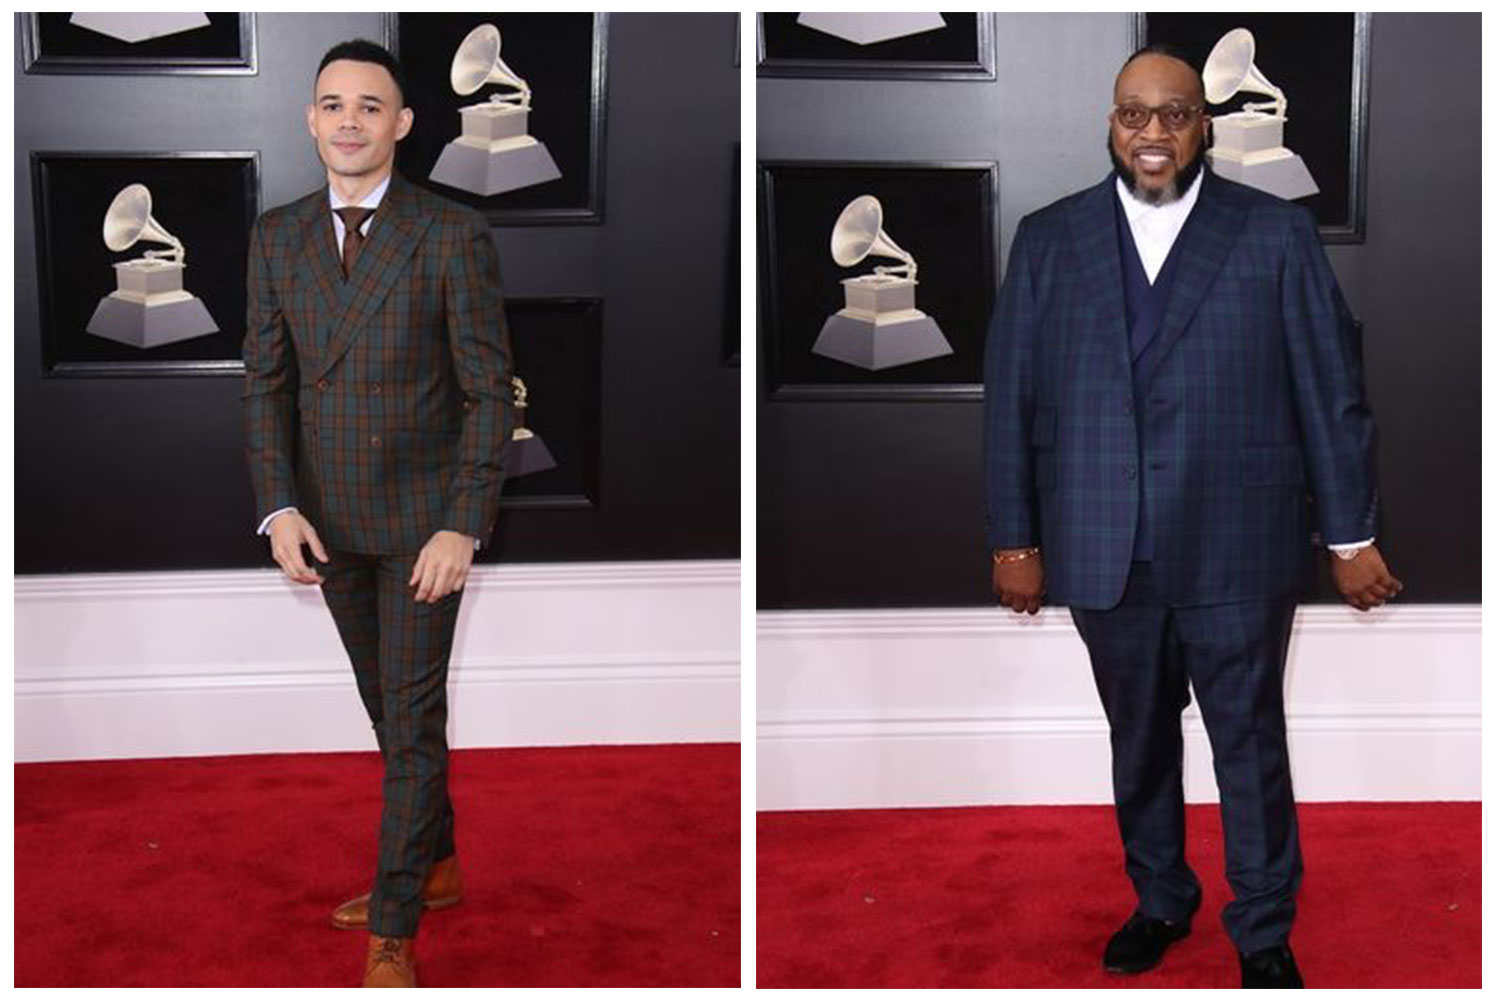 Grammy Award 2018 grammy award 2018 - 4 - Grammy Award 2018 &#8211; Men that rocked the red carpet